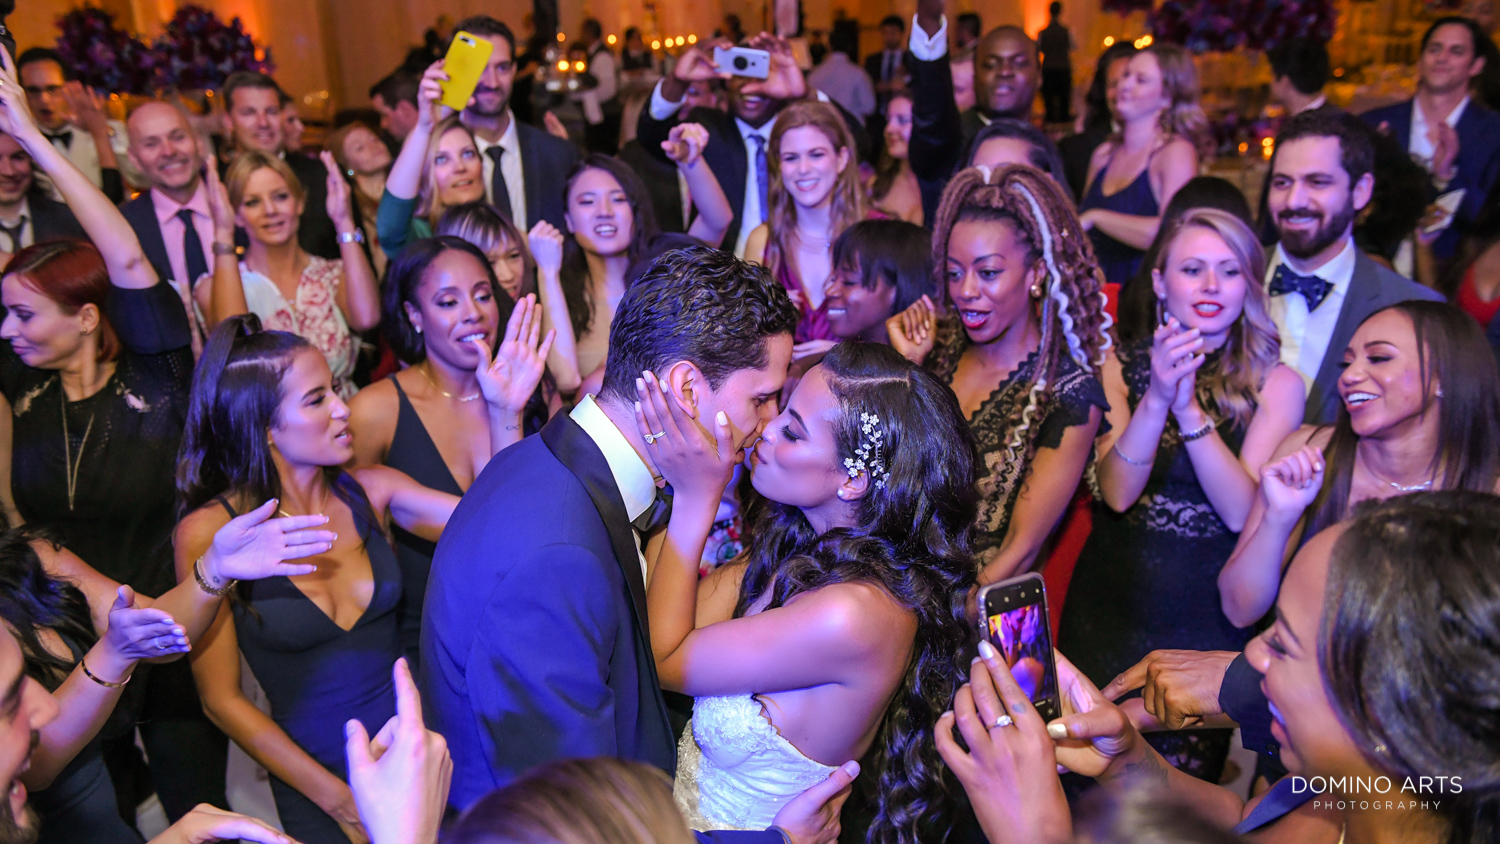 Fun wedding party pictures at The St. Regis Bal Harbour